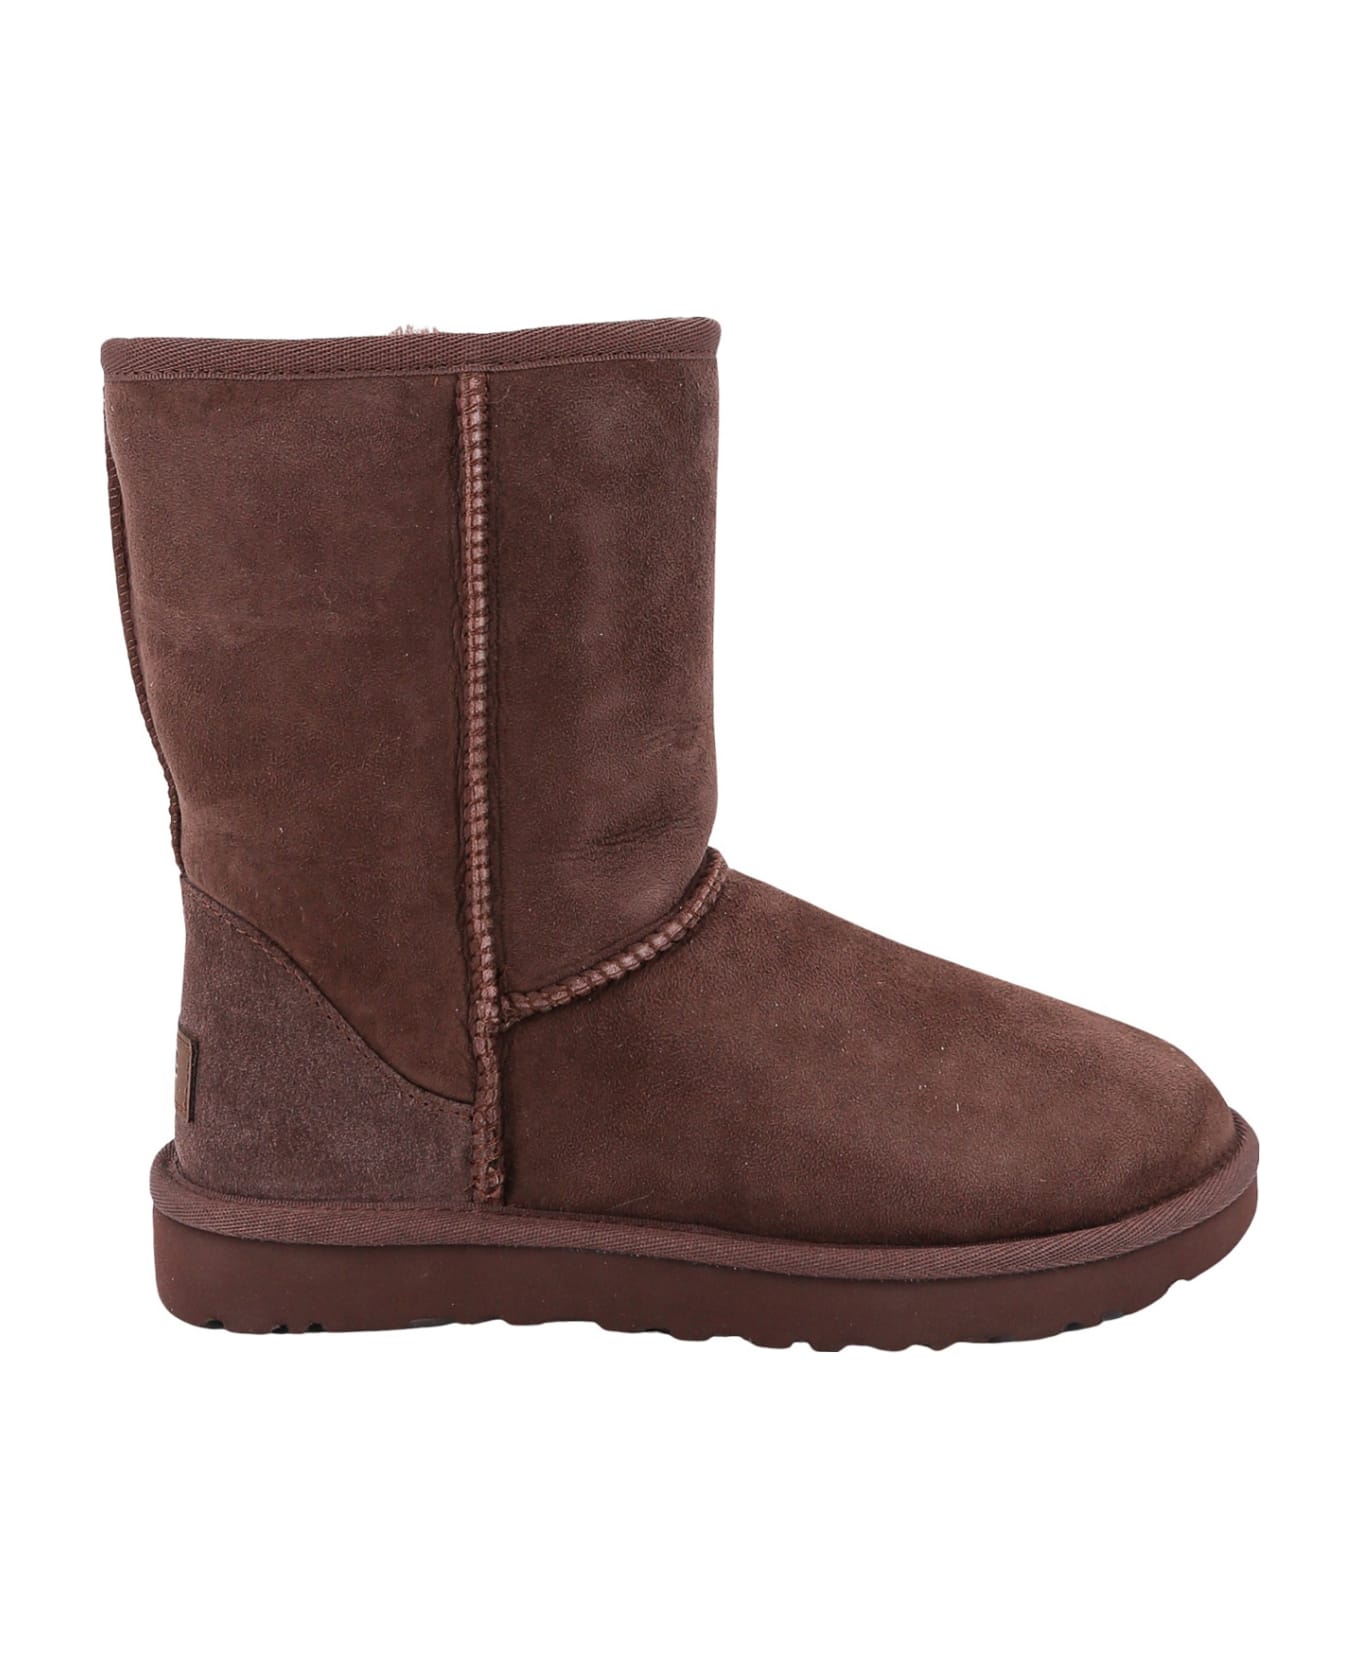 UGG Classic Short Ankle Boots - Brown